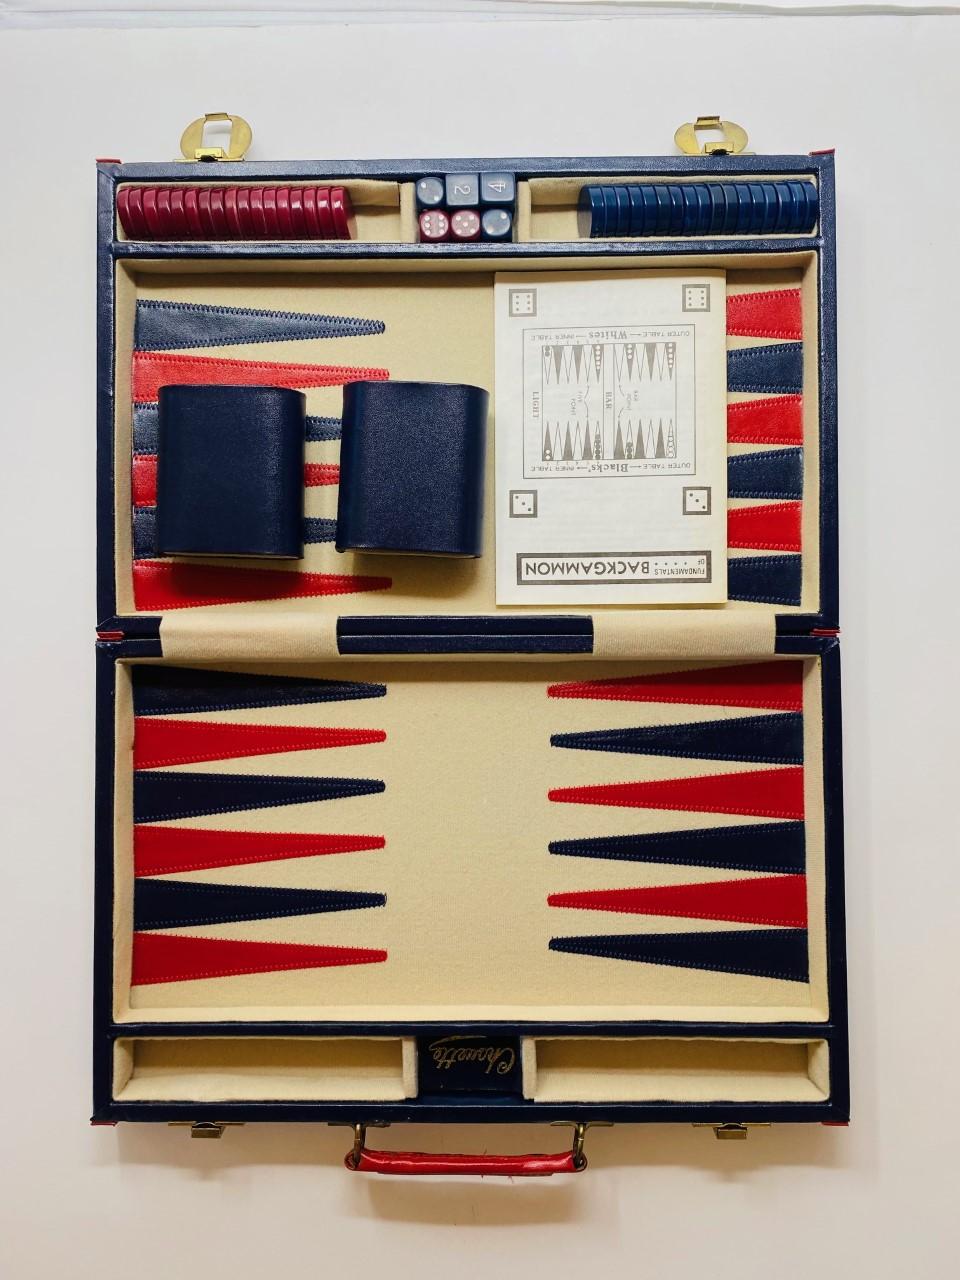 Vintage 1960s backgammon set. This set is Classic. Enveloped in blue with red trimming and with brass detailing, the set opens to a playful design is complete with 2 sets of stones, dice. Compact and original. Easy to carry and store. Minimal style